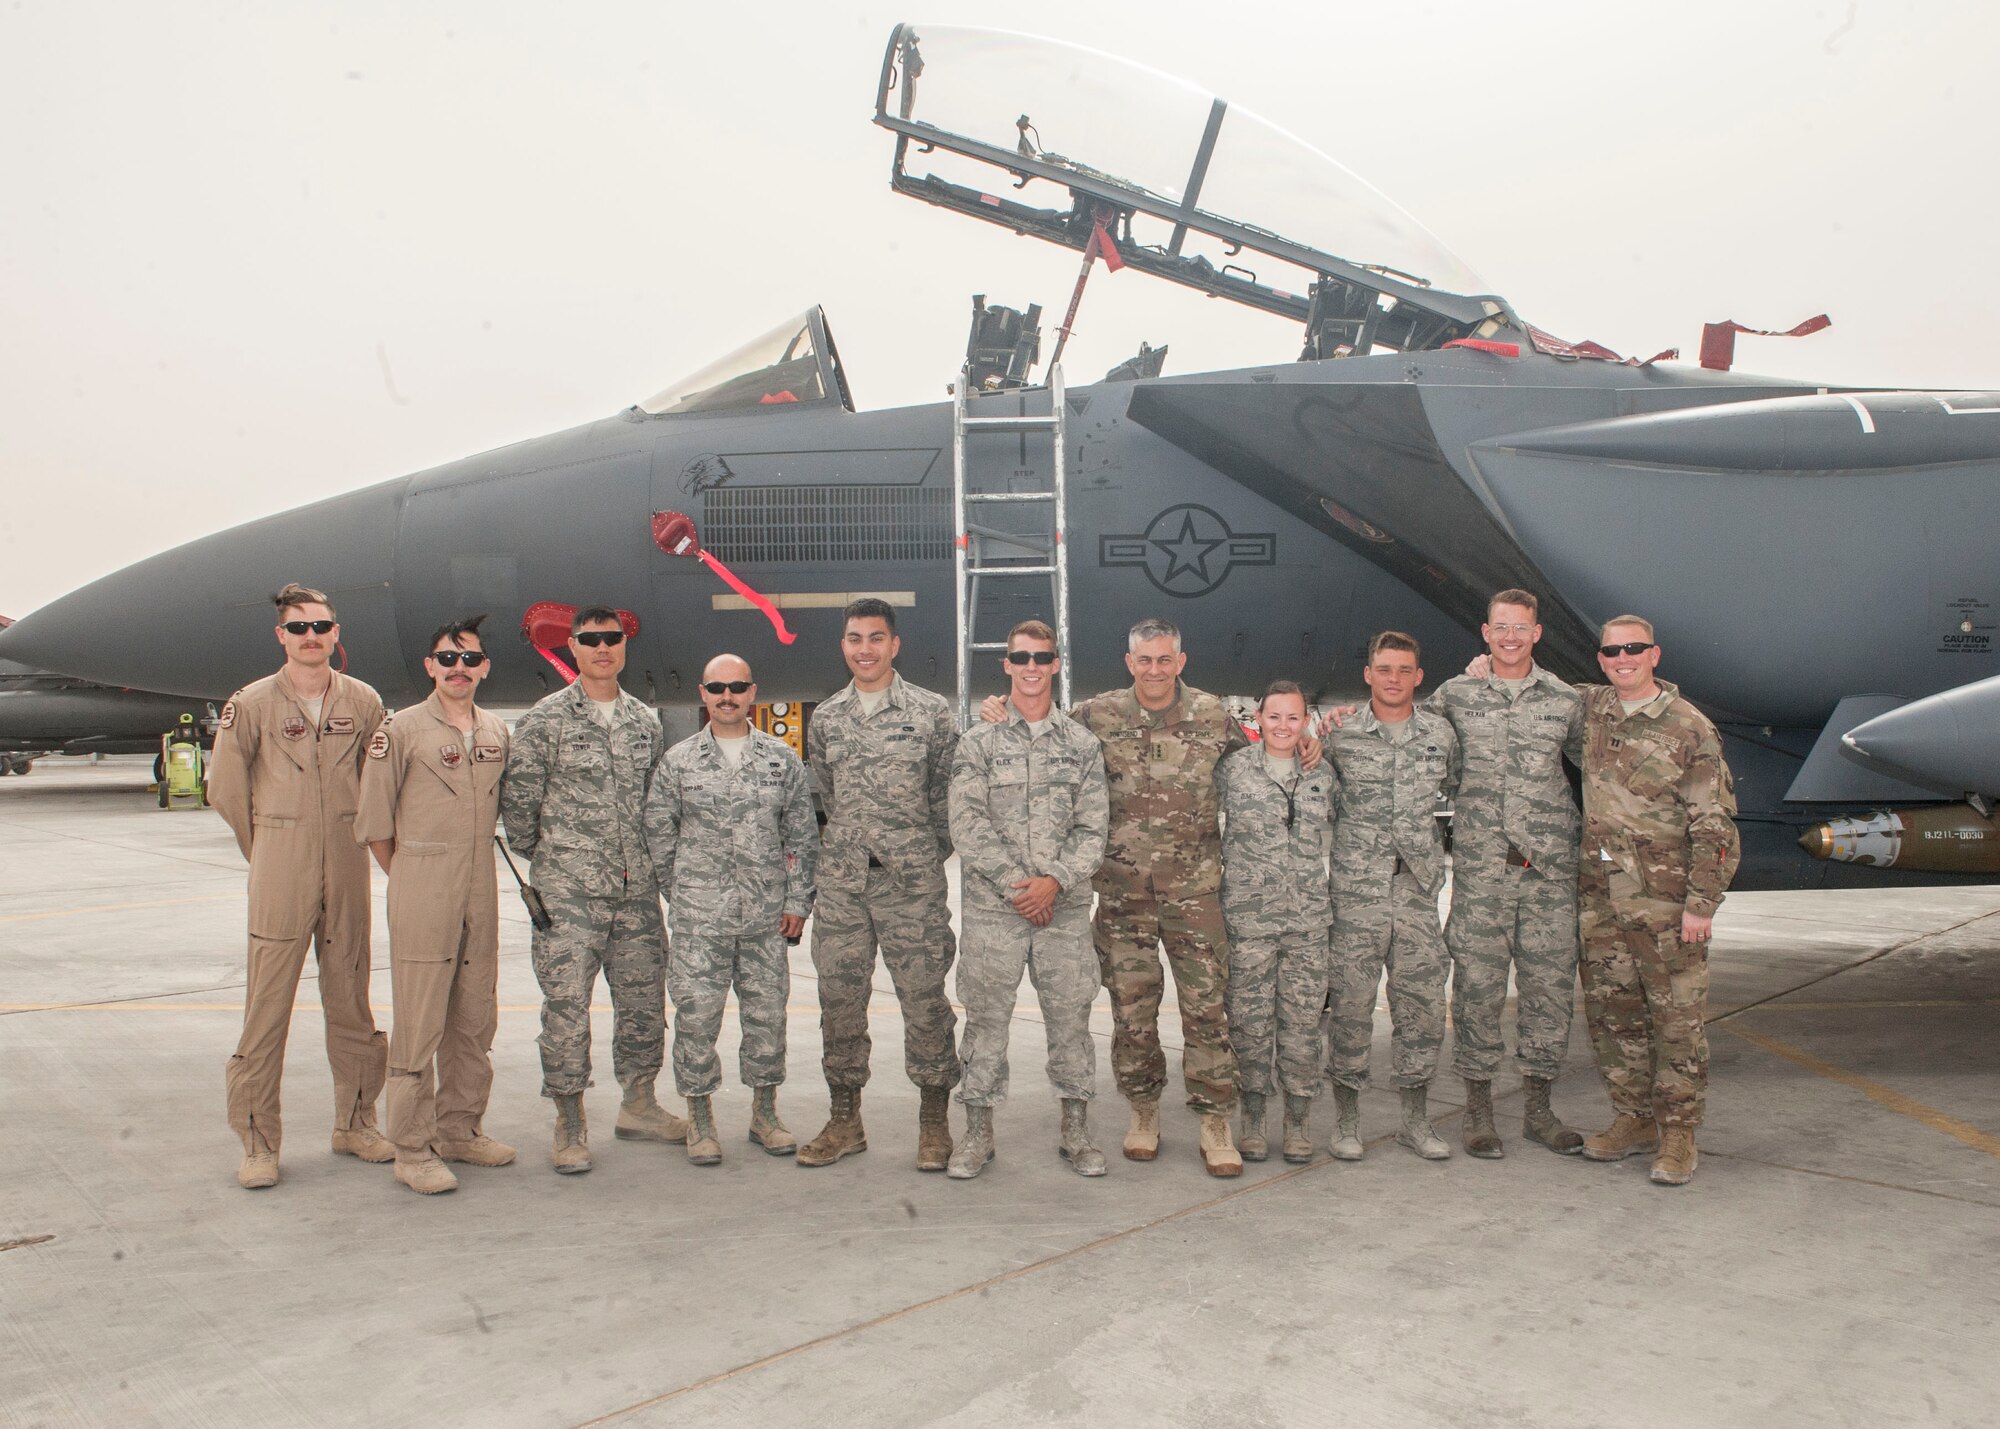 U.S. Army Lt. Gen. Stephen Townsend, Combined Joint Task Force – Operation Inherent Resolve commanding general, poses for a photo with Airmen deployed to the 332nd Air Expeditionary Wing April 5, 2017, in Southwest Asia. The general visited Airmen and Soldiers thanking them for their contribution to the mission. (U.S. Air Force photo by Tech Sgt. Eboni Reams)